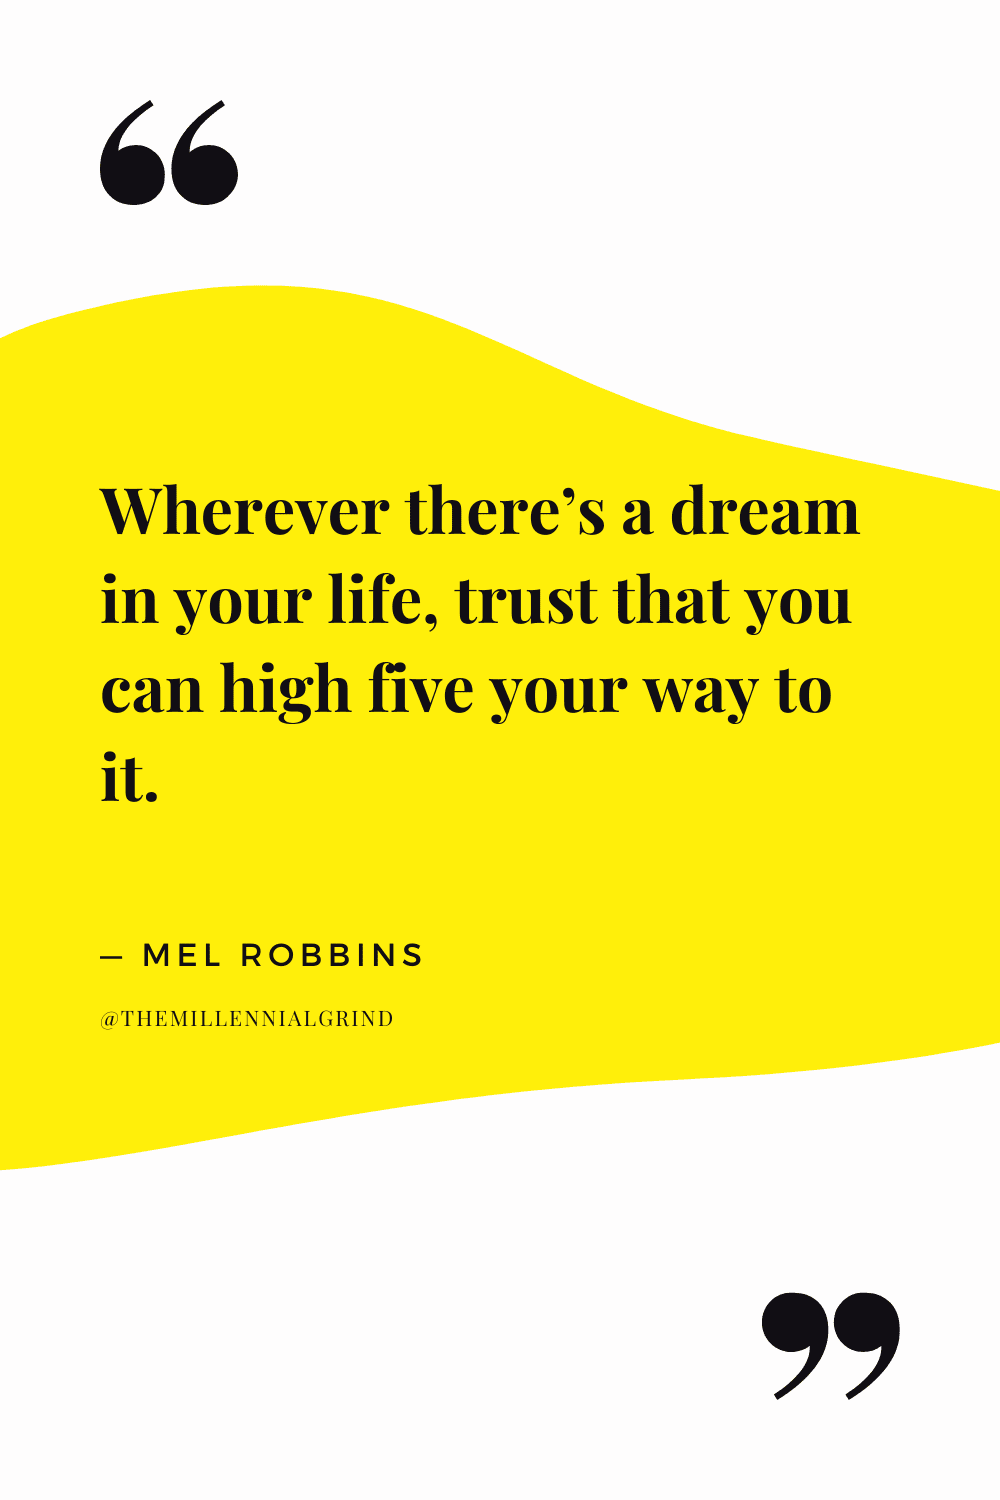 30 Quotes from The High 5 Habit by Mel Robbins